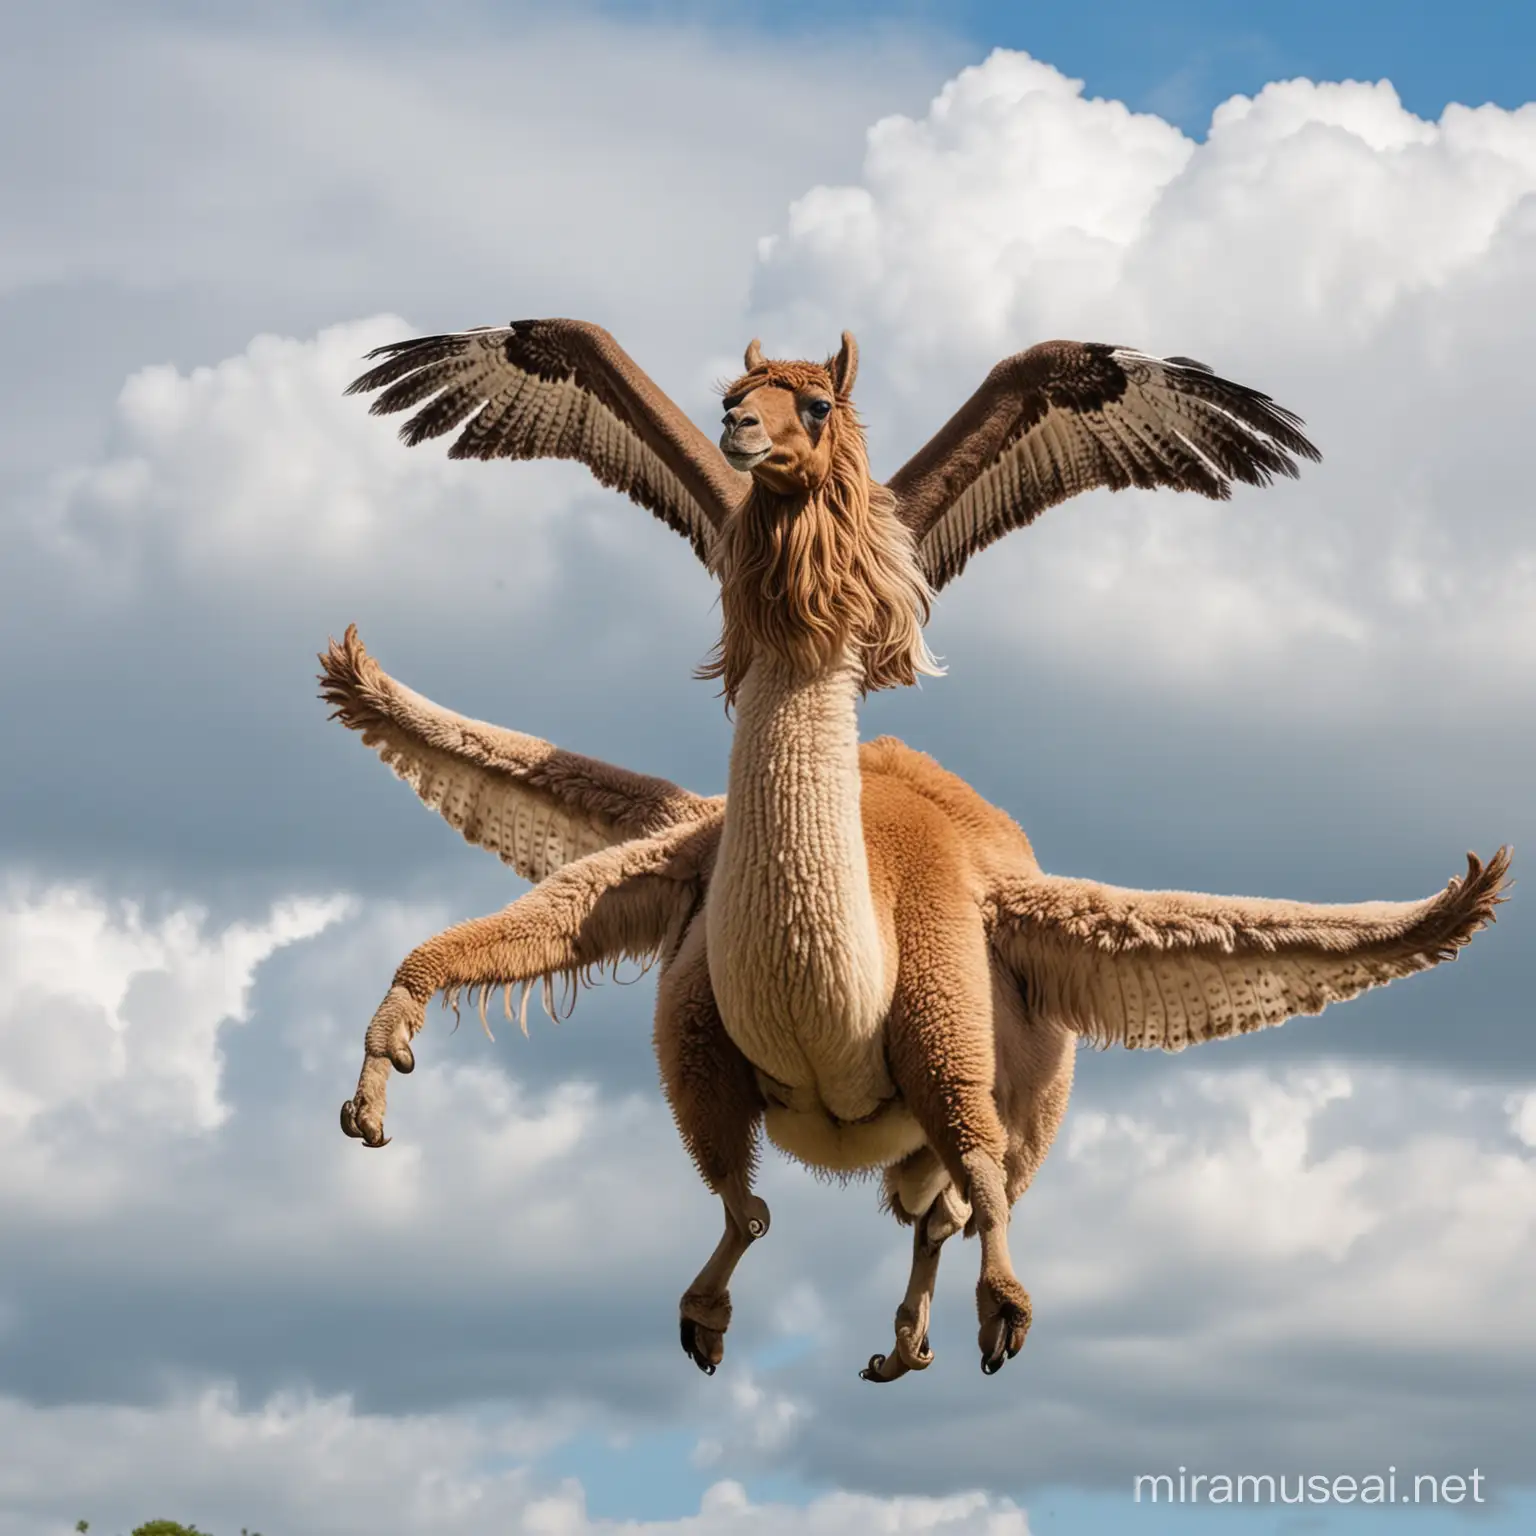 Hybrid of a llama and an octopus. Flying In the sky over Hyde Park in London.
